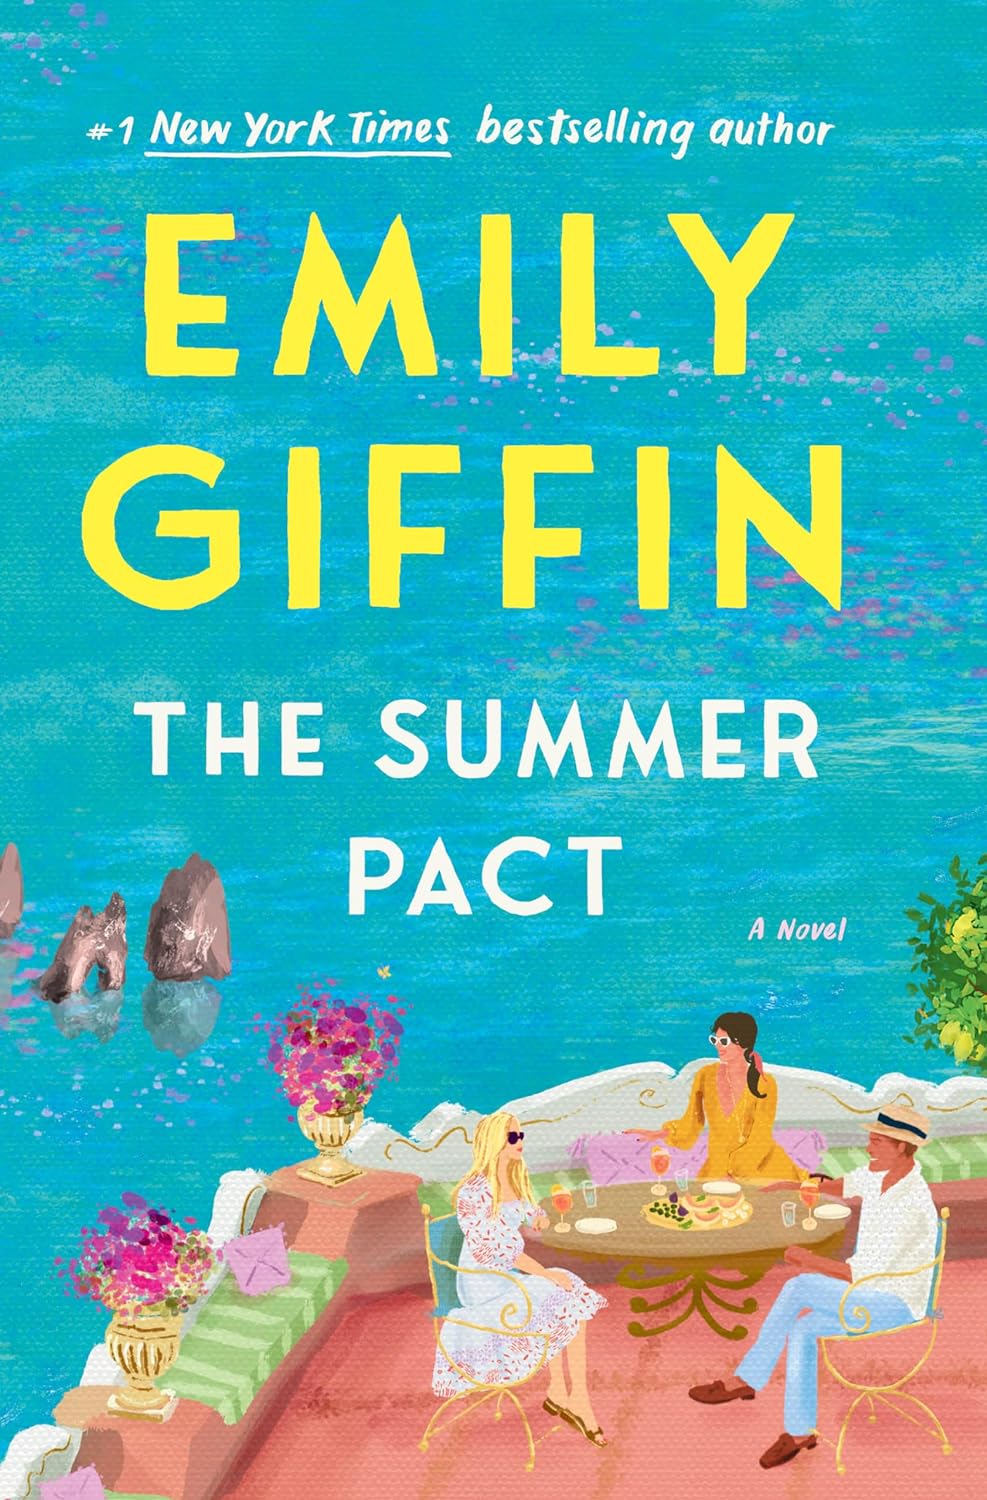 Image for "The Summer Pact"